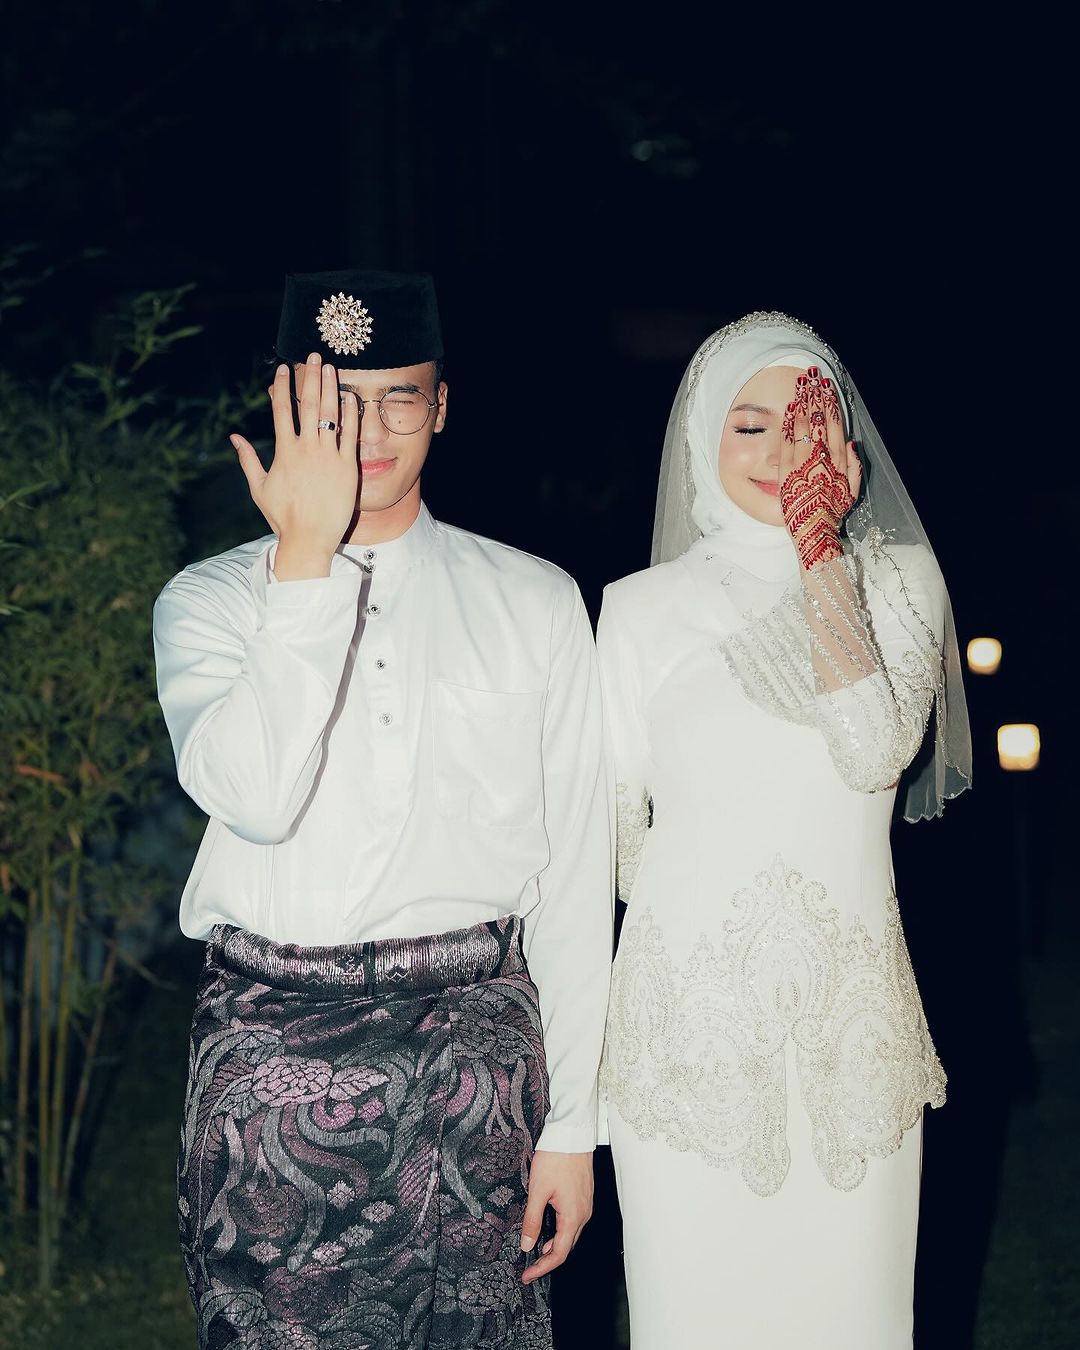 Syasya and her husband showing their ring